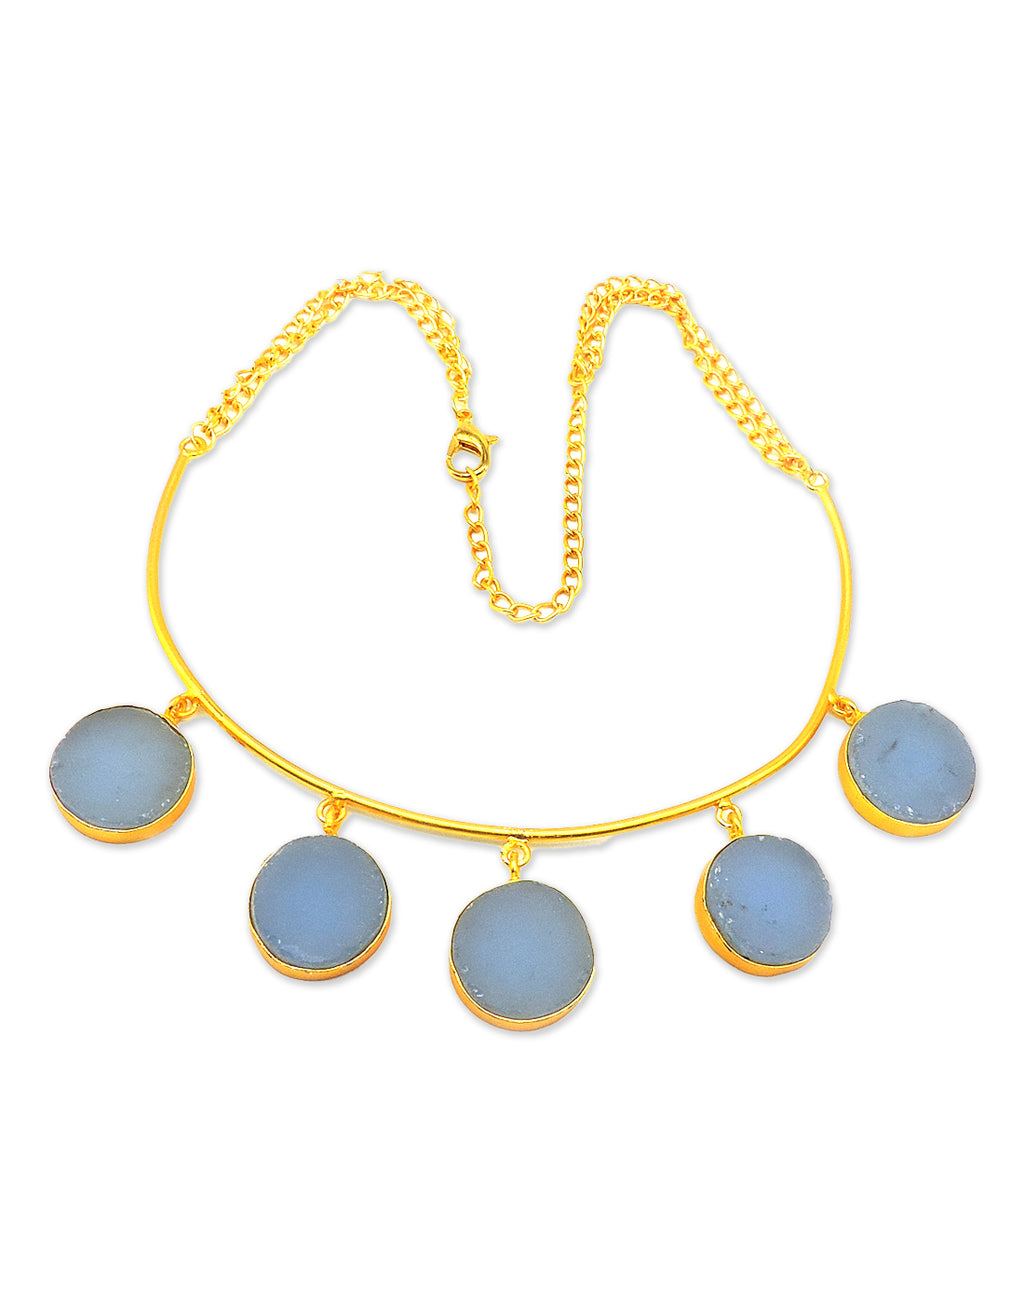 Blue Onyx Necklace - Statement Necklaces - Gold-Plated & Hypoallergenic Jewellery - Made in India - Dubai Jewellery - Dori